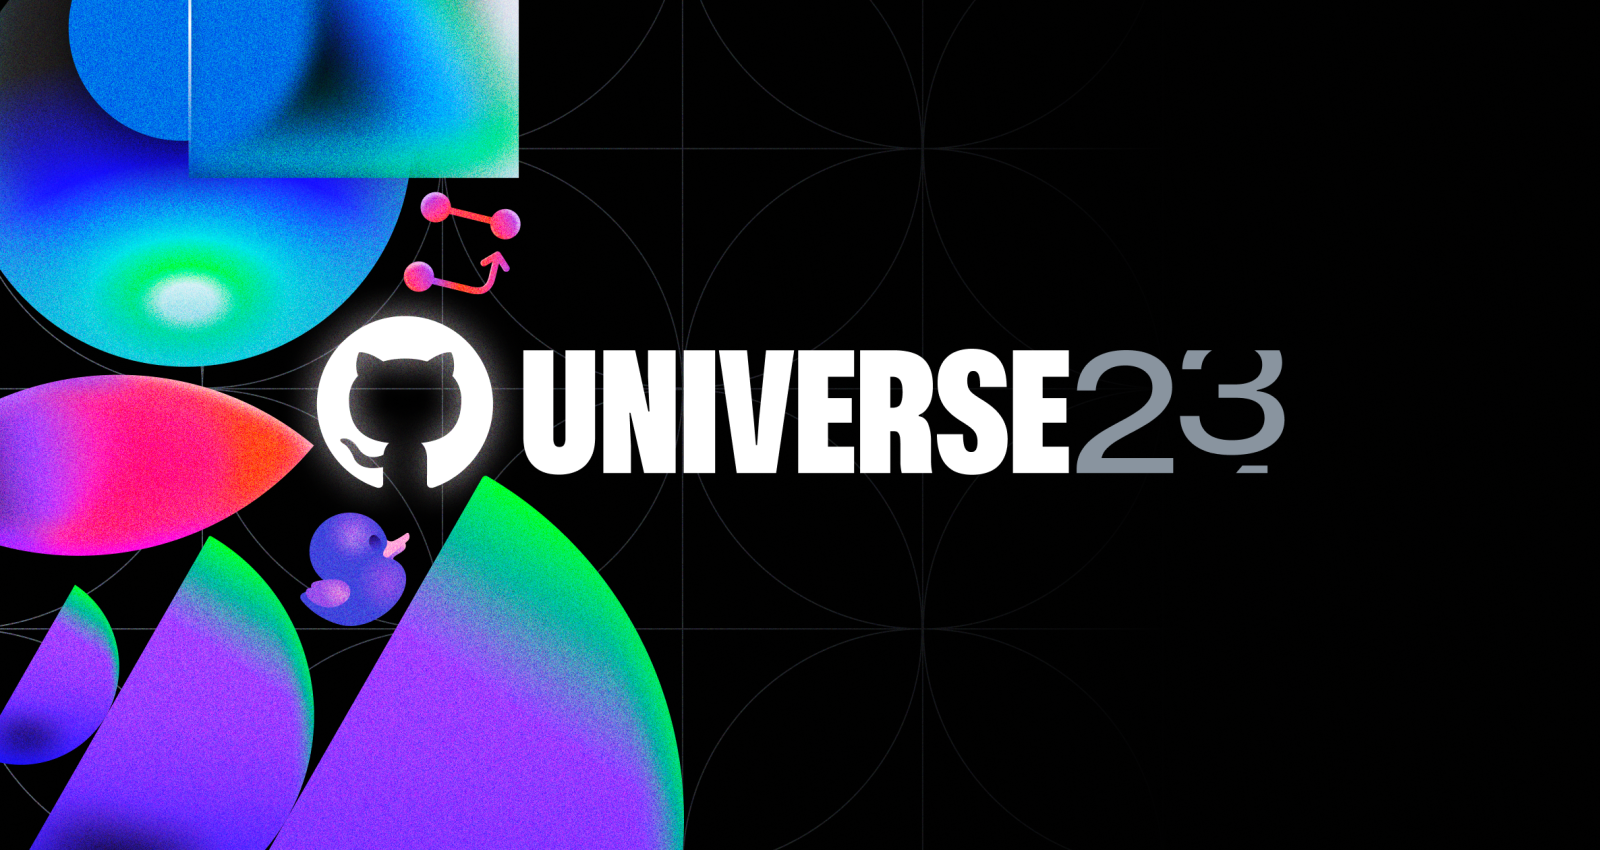 Your ultimate guide to the GitHub Universe ‘23 agenda